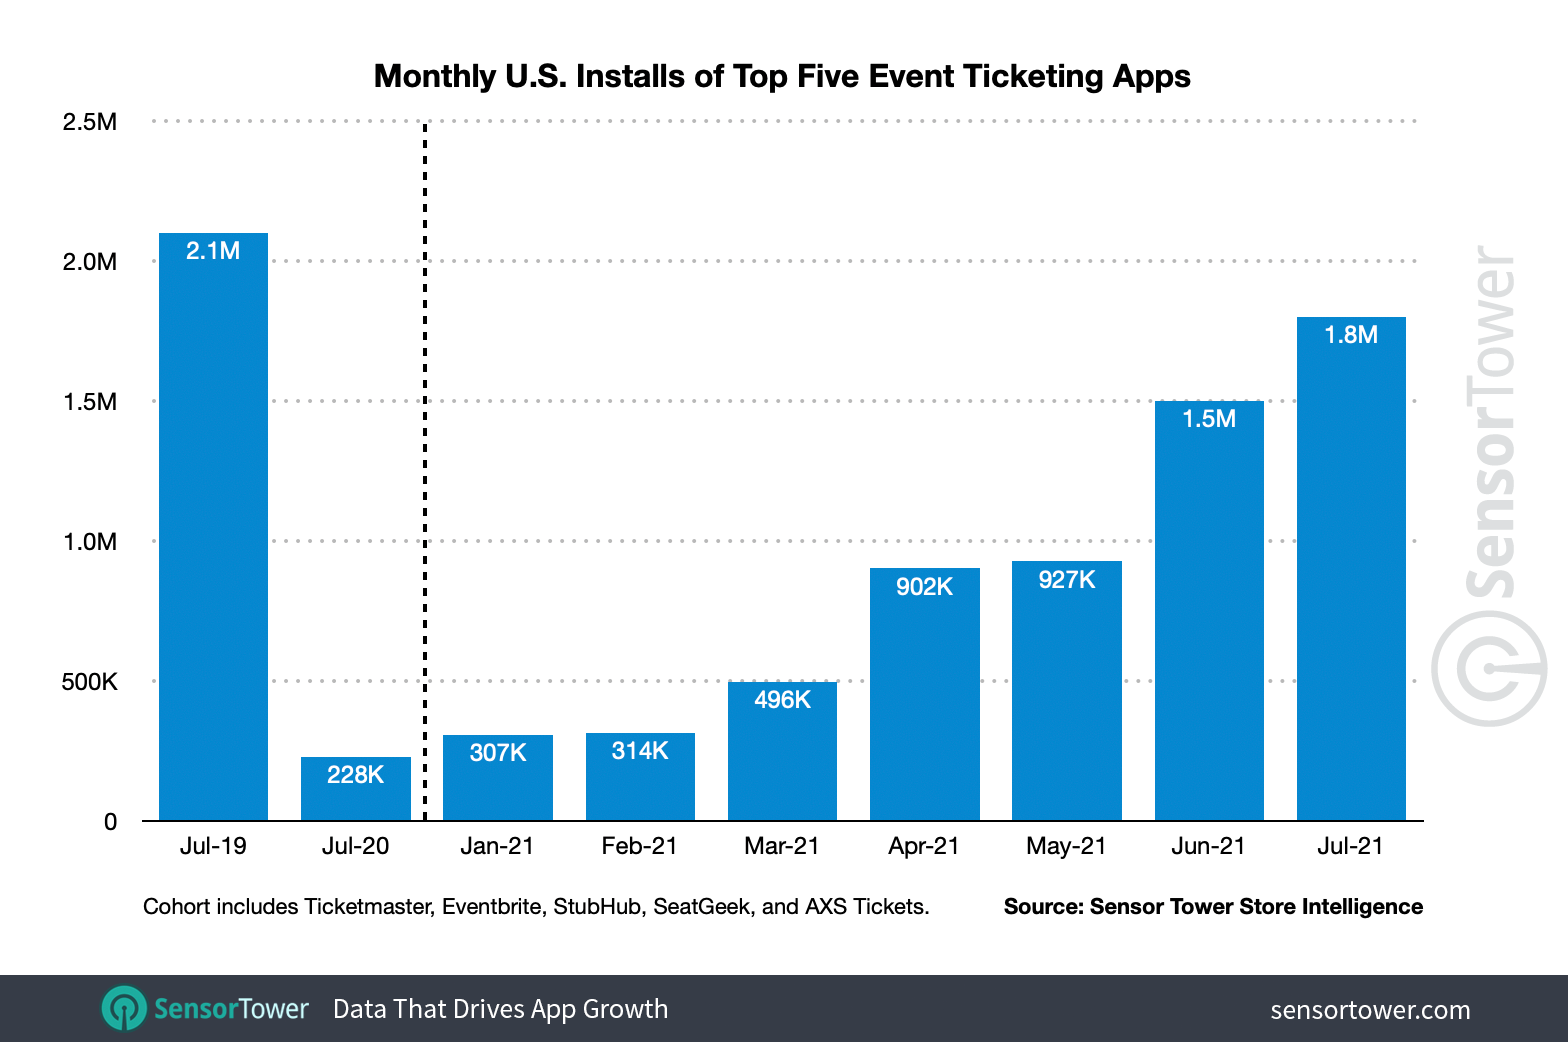 U.S. monthly installs of the top event ticketing apps